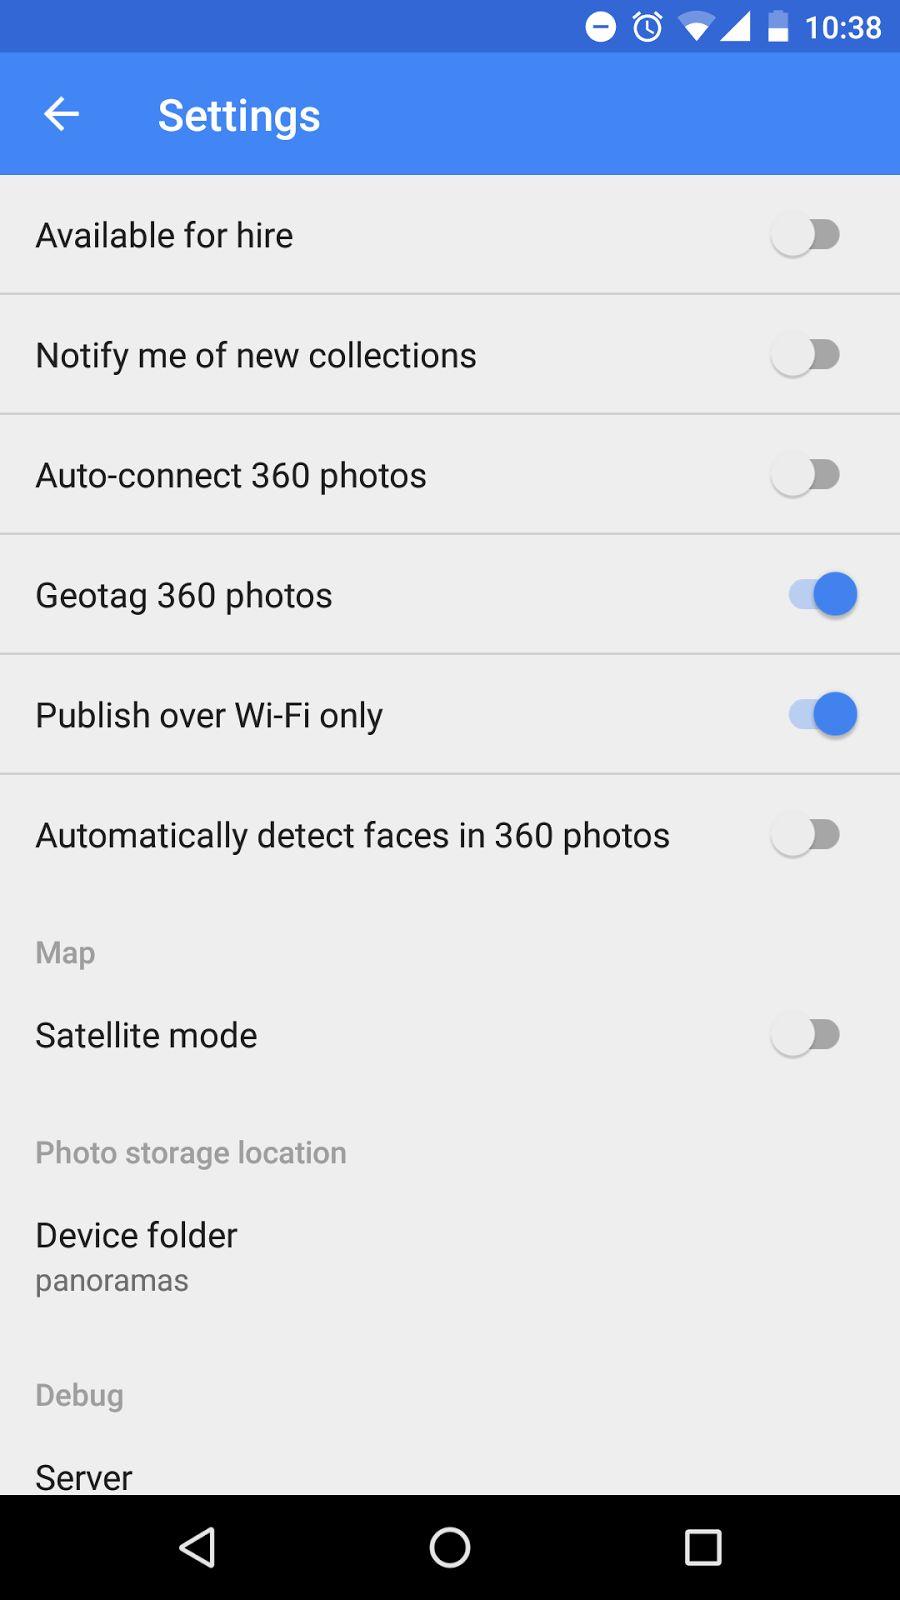 1.2. Getting Started Street View App App Settings Sidebar Menu - Tap the three bar icon in the top left corner to view App options menu: